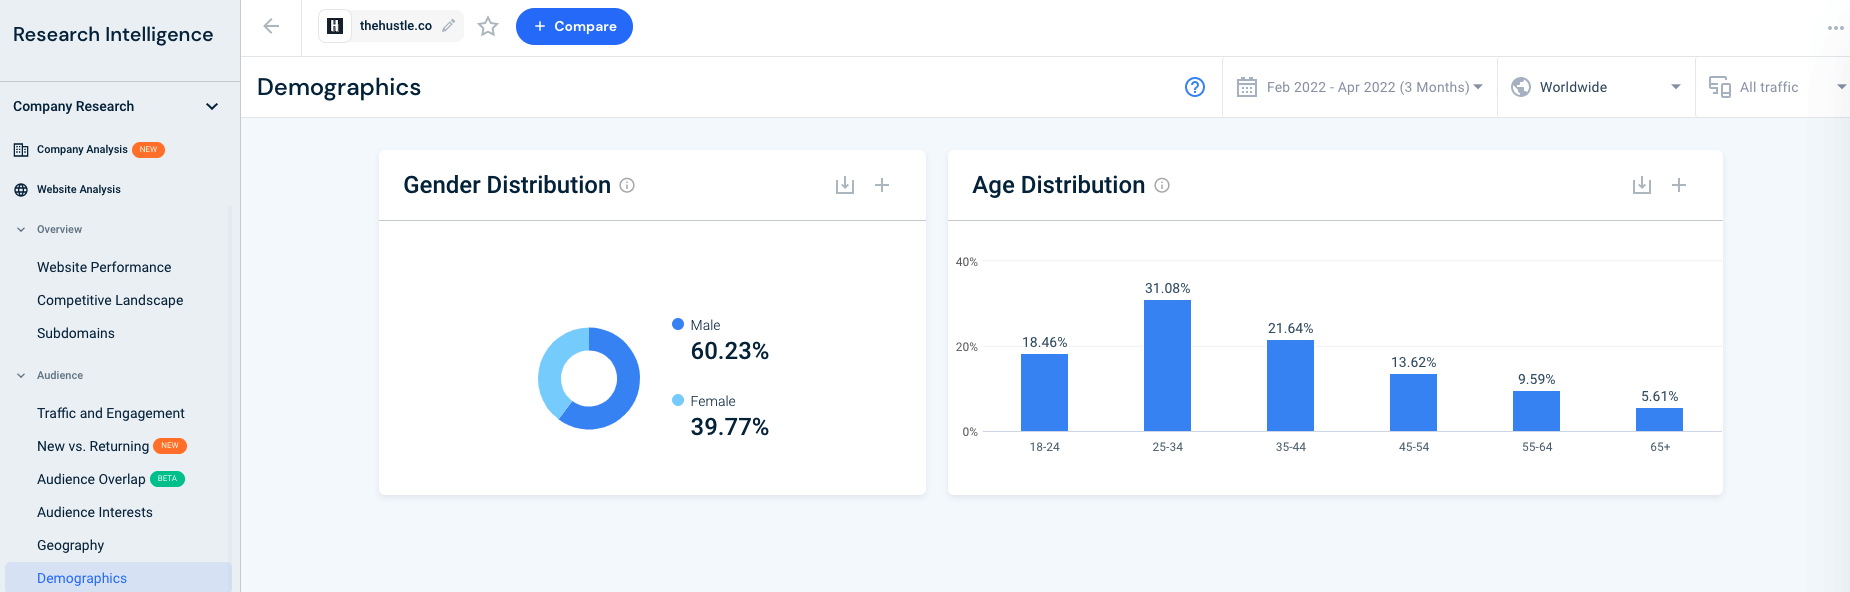 Similarweb data on thehustle.co’s gender and age distribution breakdown.